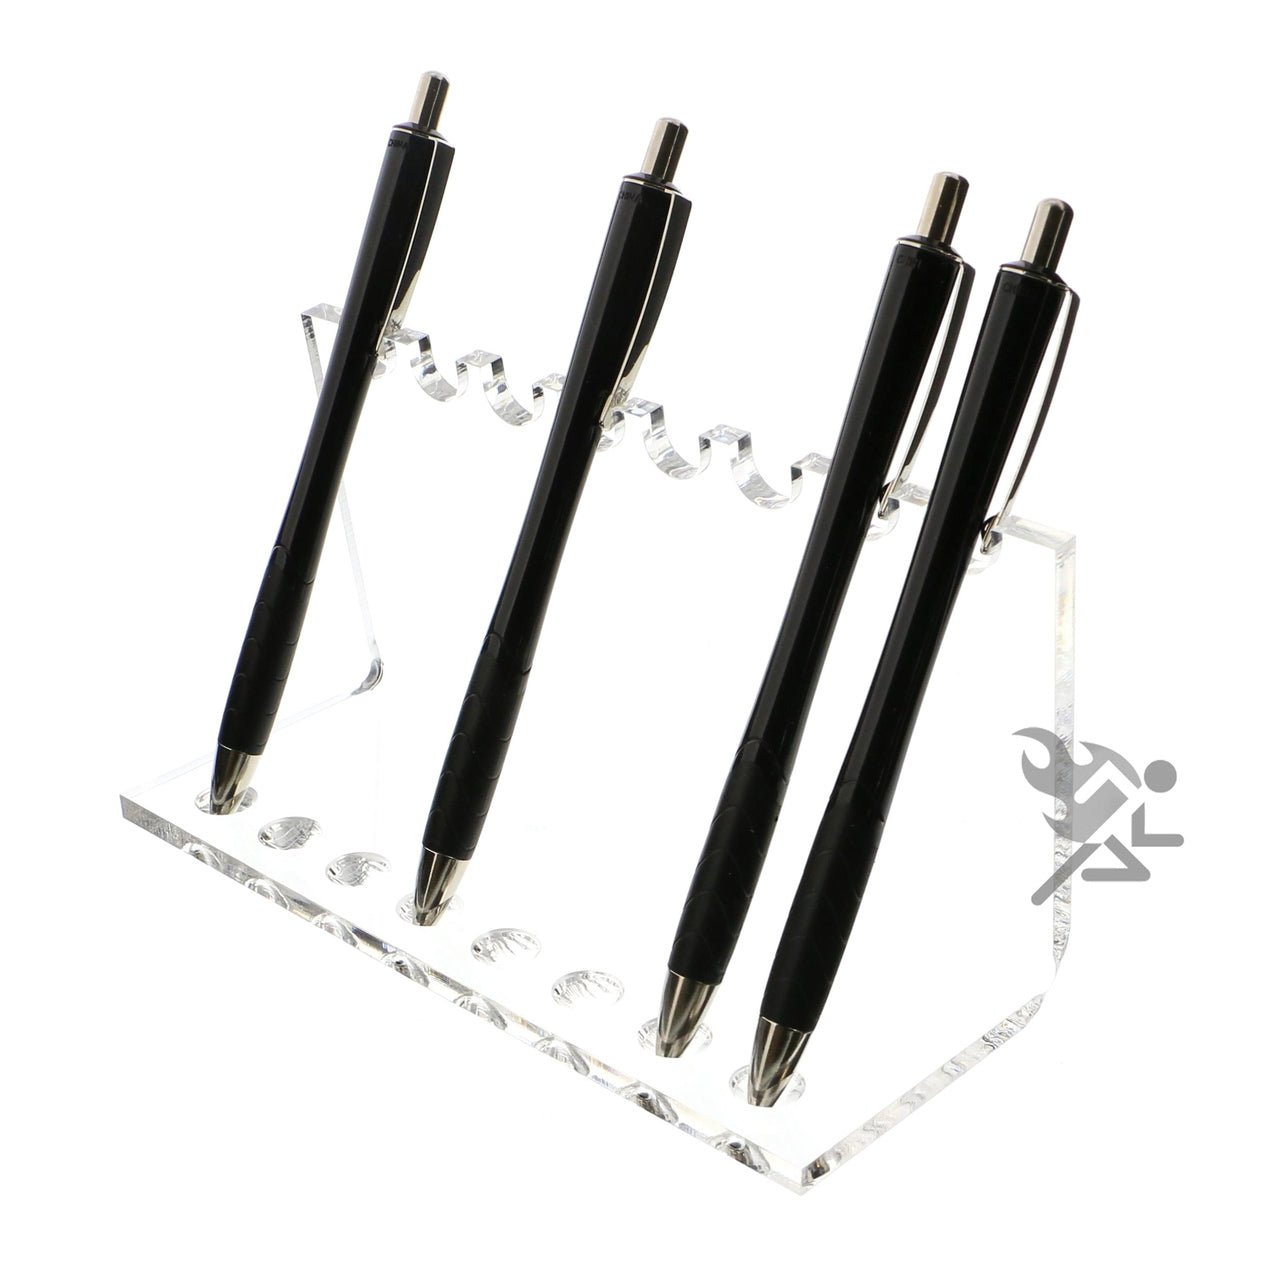 Pen Display Stand Easel holds Set of Eight Pens